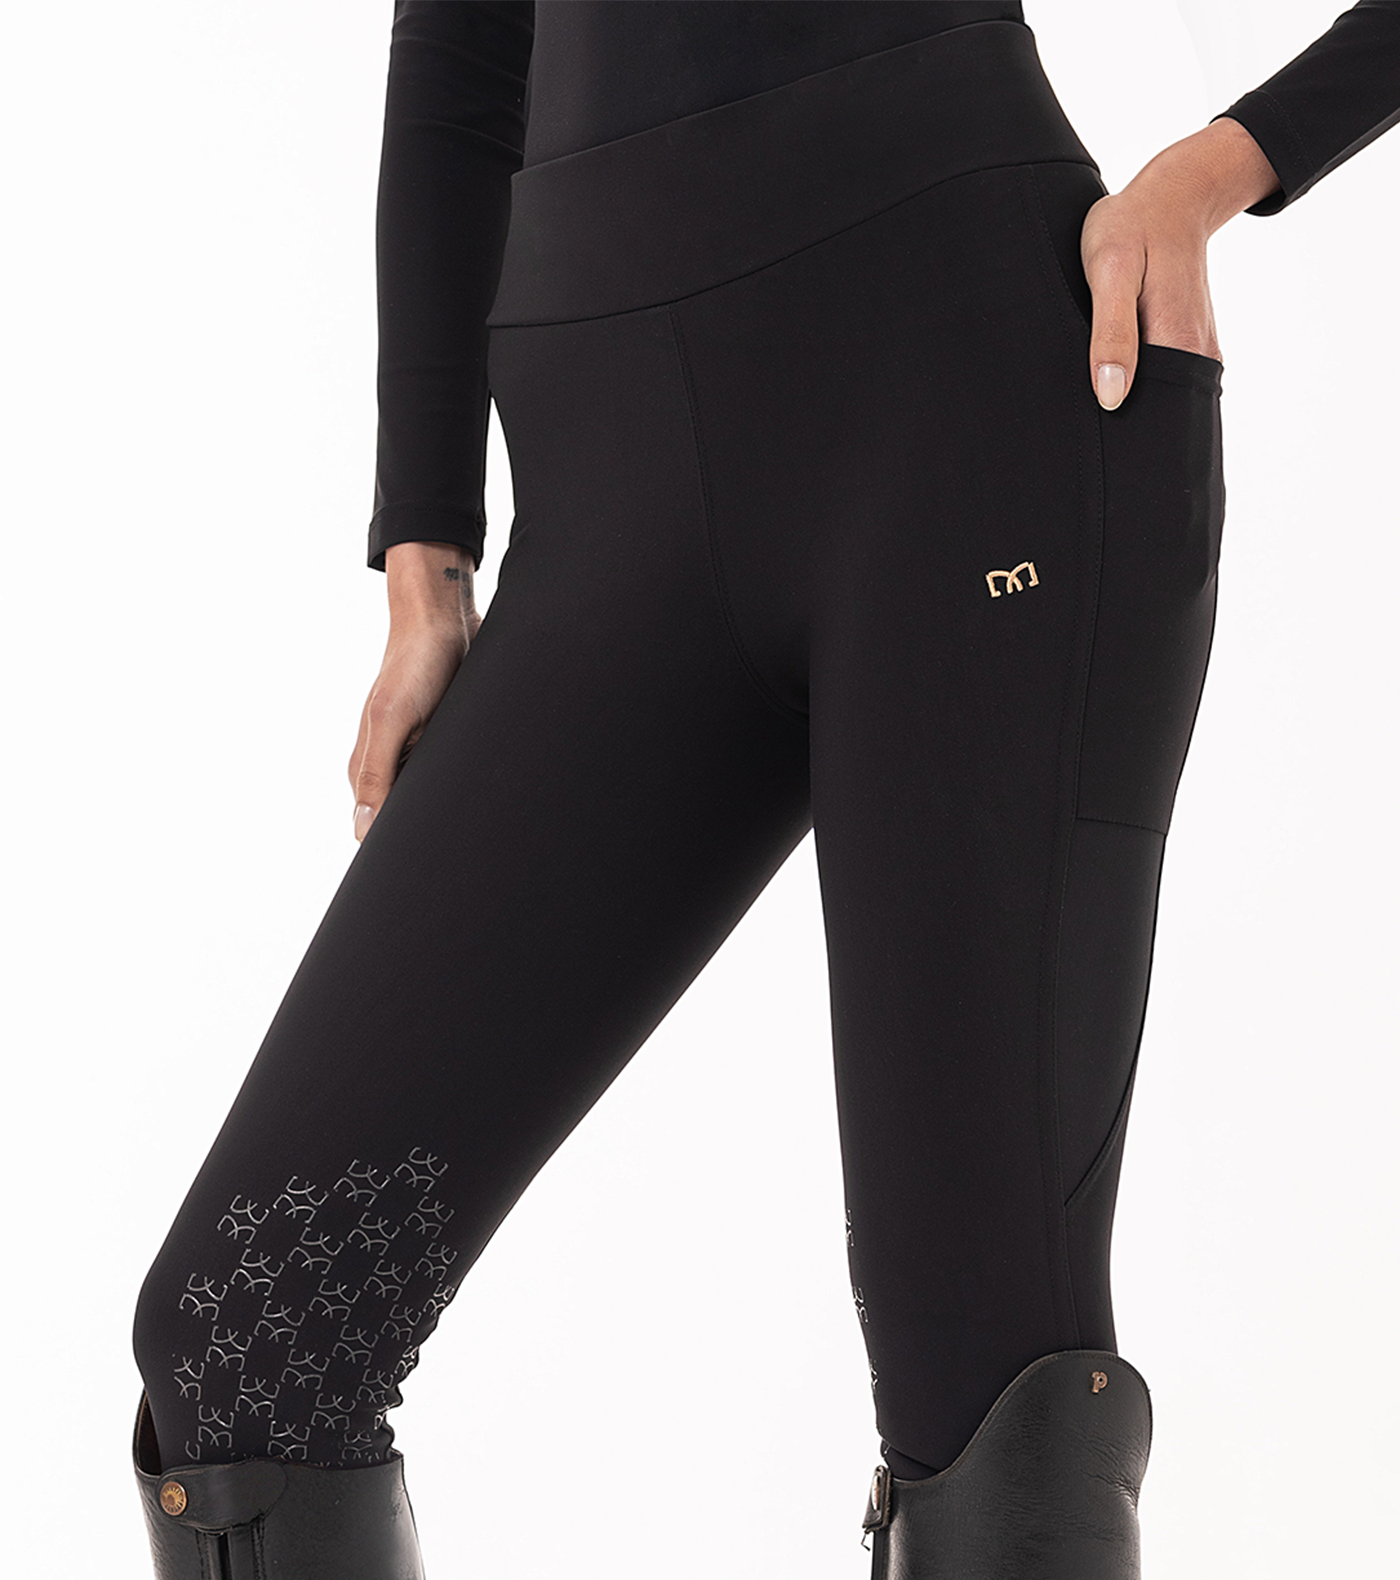 Compressive ankle-length leggings with reinforced waist